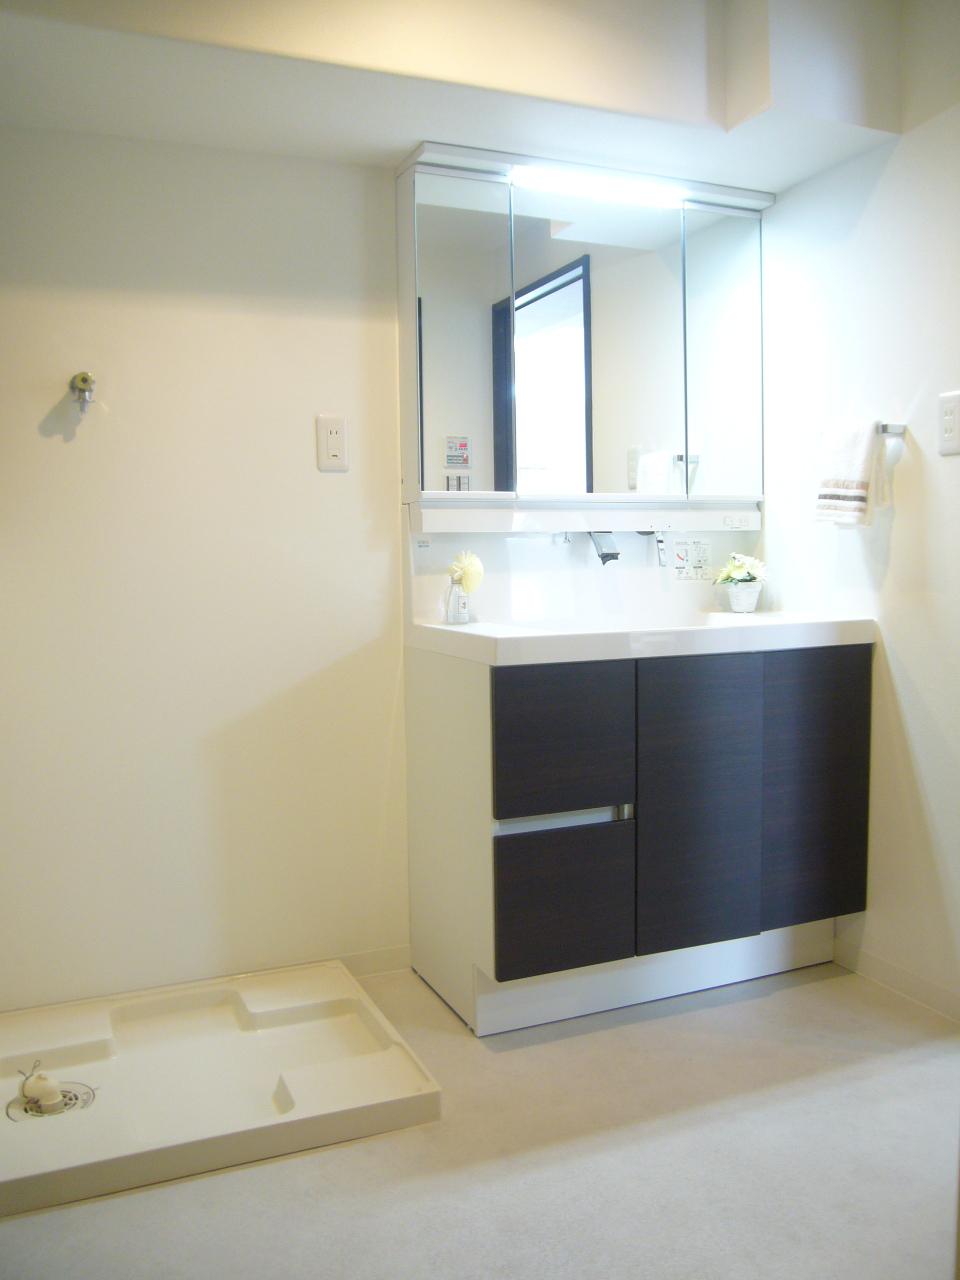 Wash basin, toilet.  ◆ Wash room (12 May 2013) Shooting  ・ Vanity (LIXIL Co., Ltd.) exchange.  ・ Three-sided mirror type is. Kagamiura is housed.  ・ The water faucet should, It can be used as a shower and pull.  ・ Drain outlet is dirt accumulate less in flangeless.